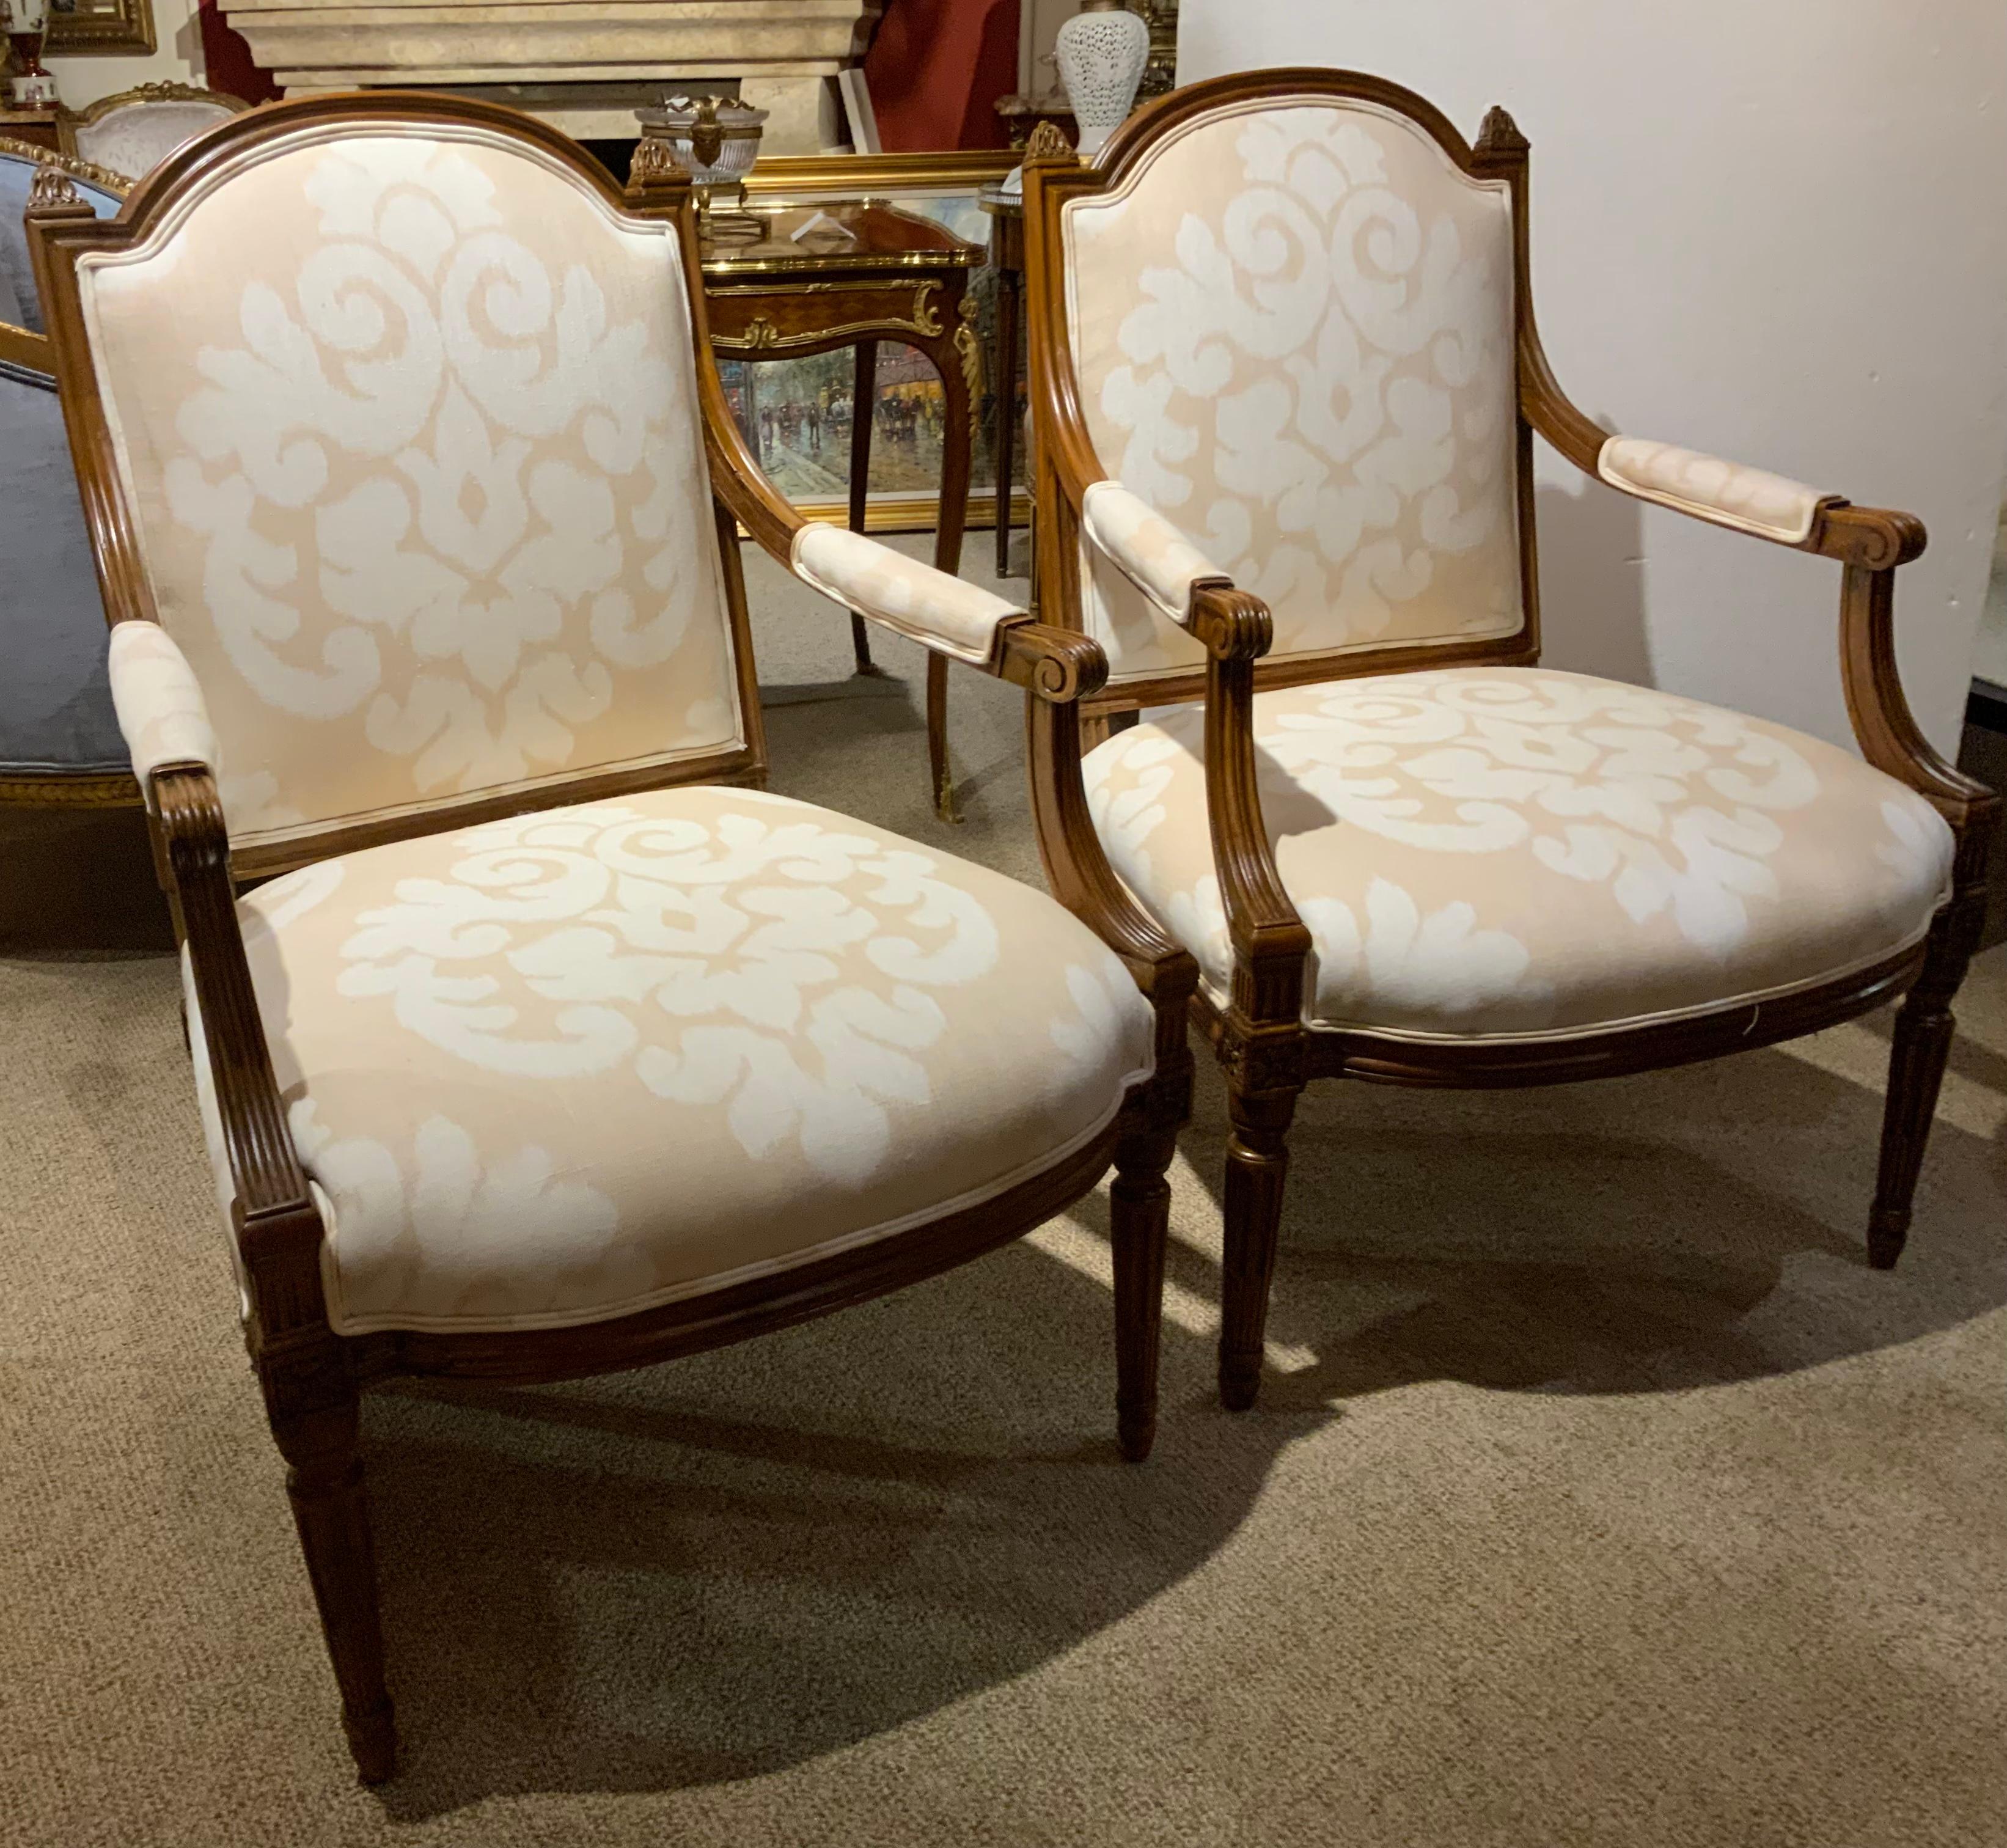 Pair of Walnut Louis XVI—Style Arm Chairs 19th Century with Domed Back For Sale 1